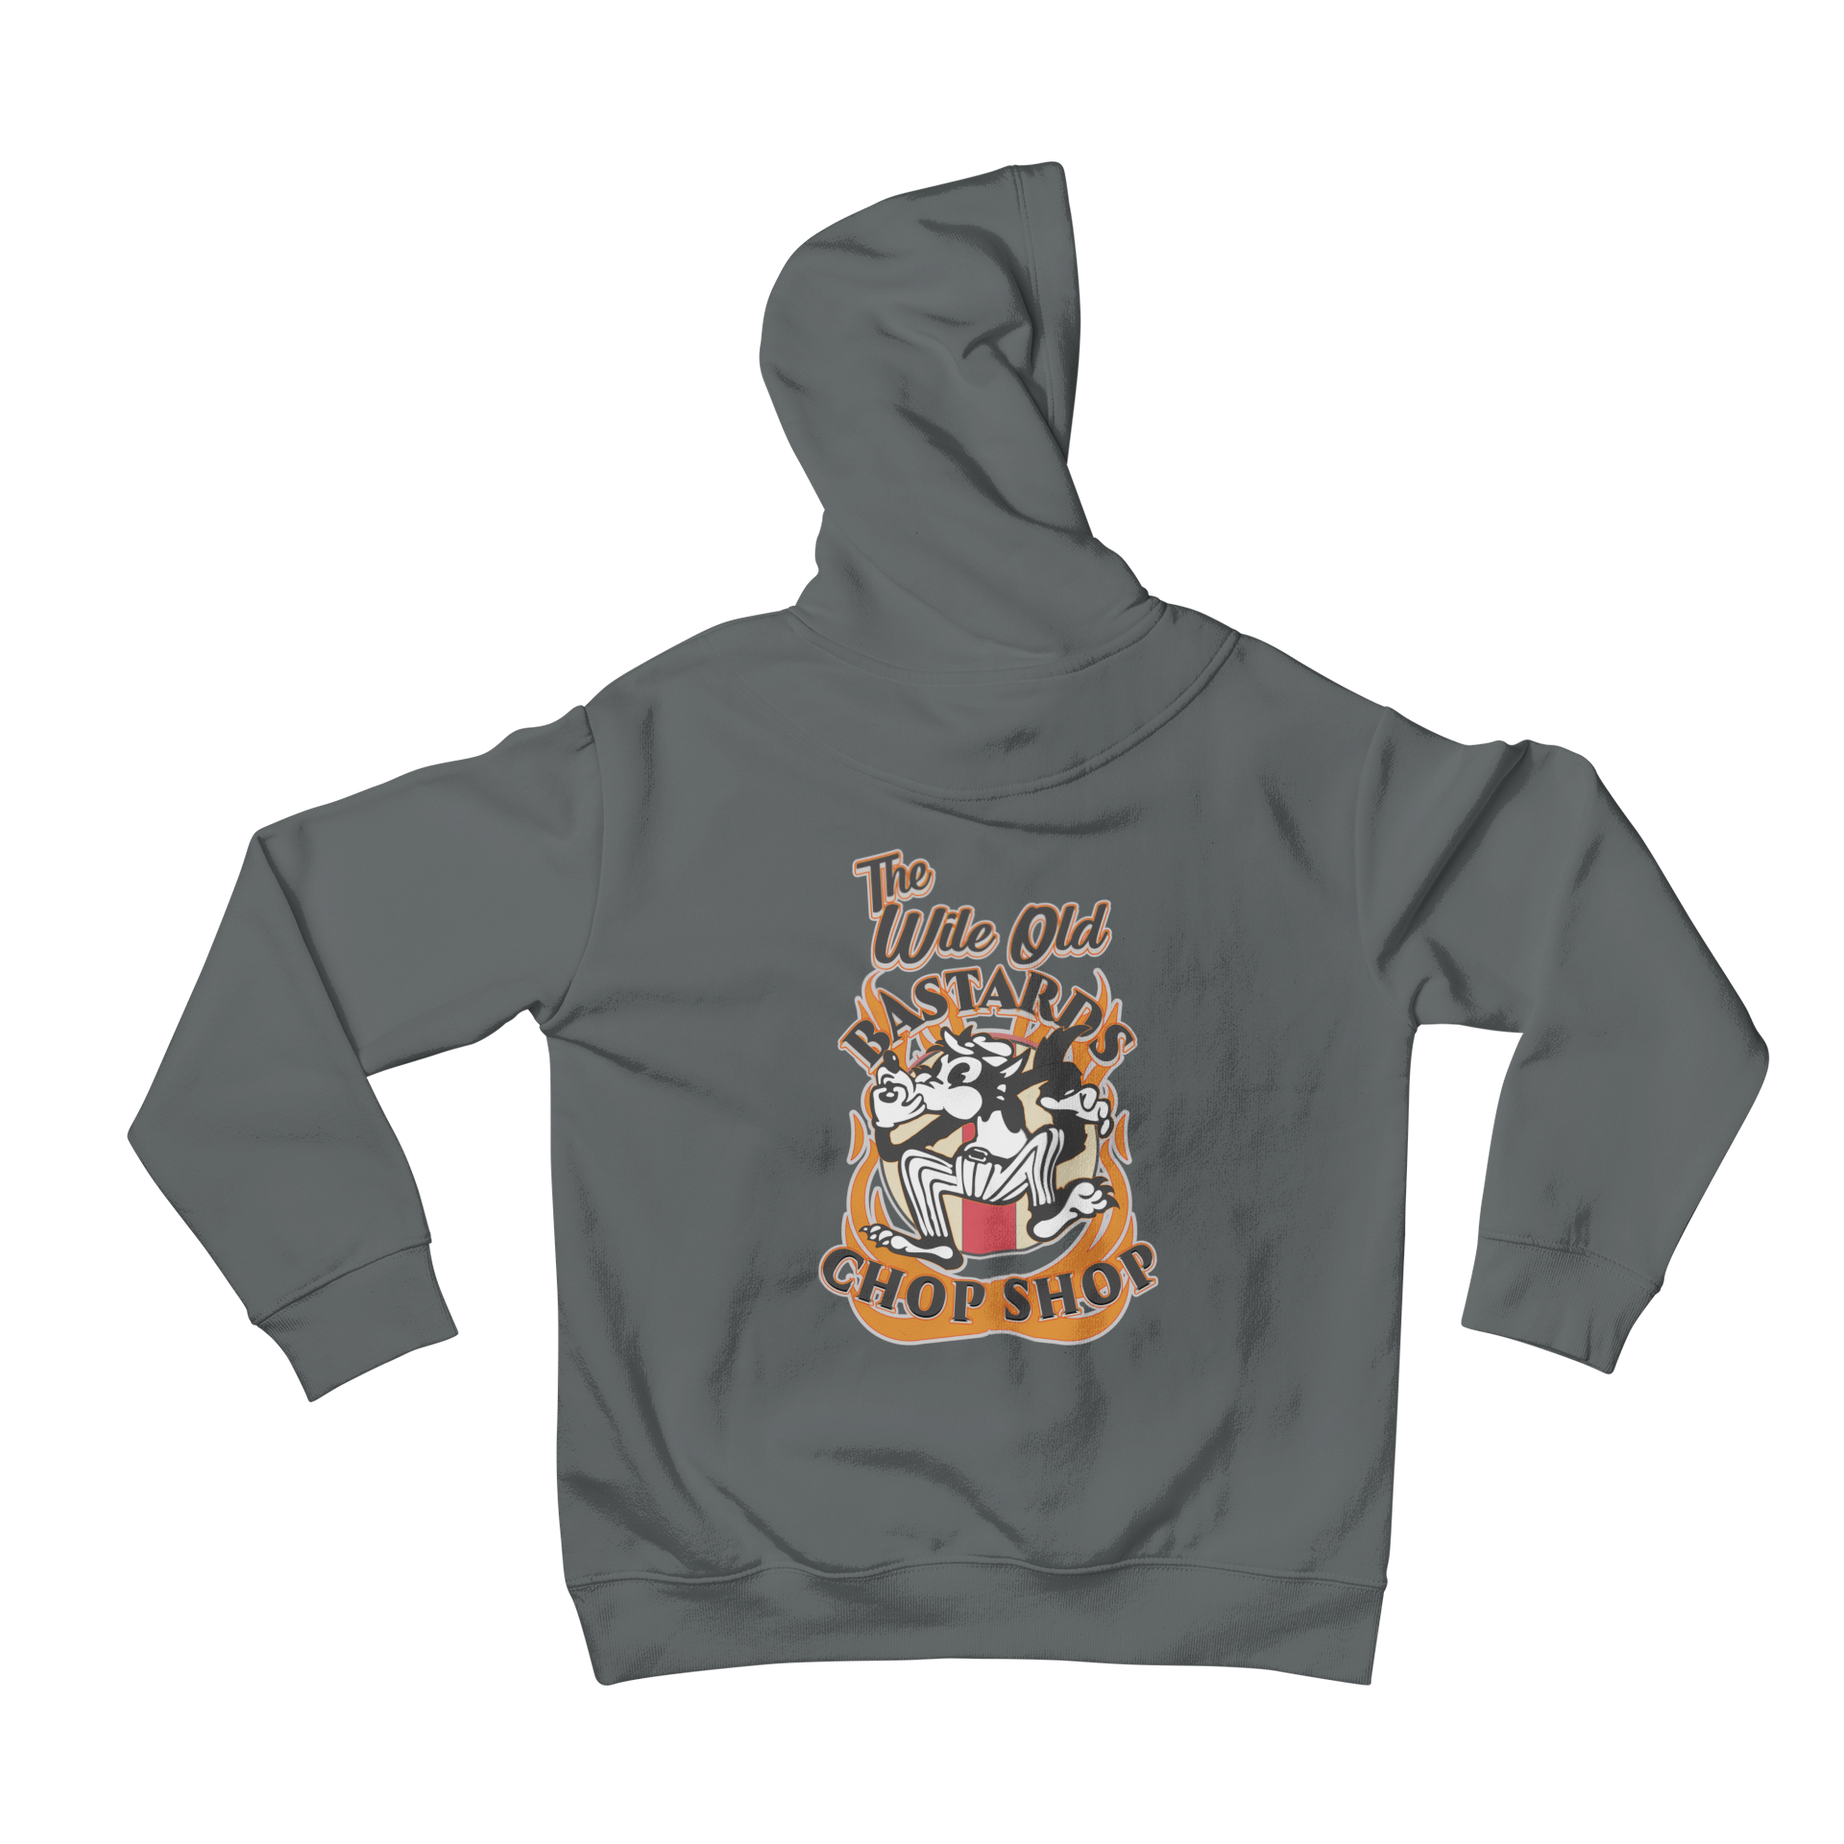 Looking for an awesome hoodie? Check out Teevolution's custom chop shop back print hoodie from Wile Old Basta*ds. This hoodie is perfect for anyone who wants to stand out from the crowd and show off their unique style. Shop now and get your chop on!